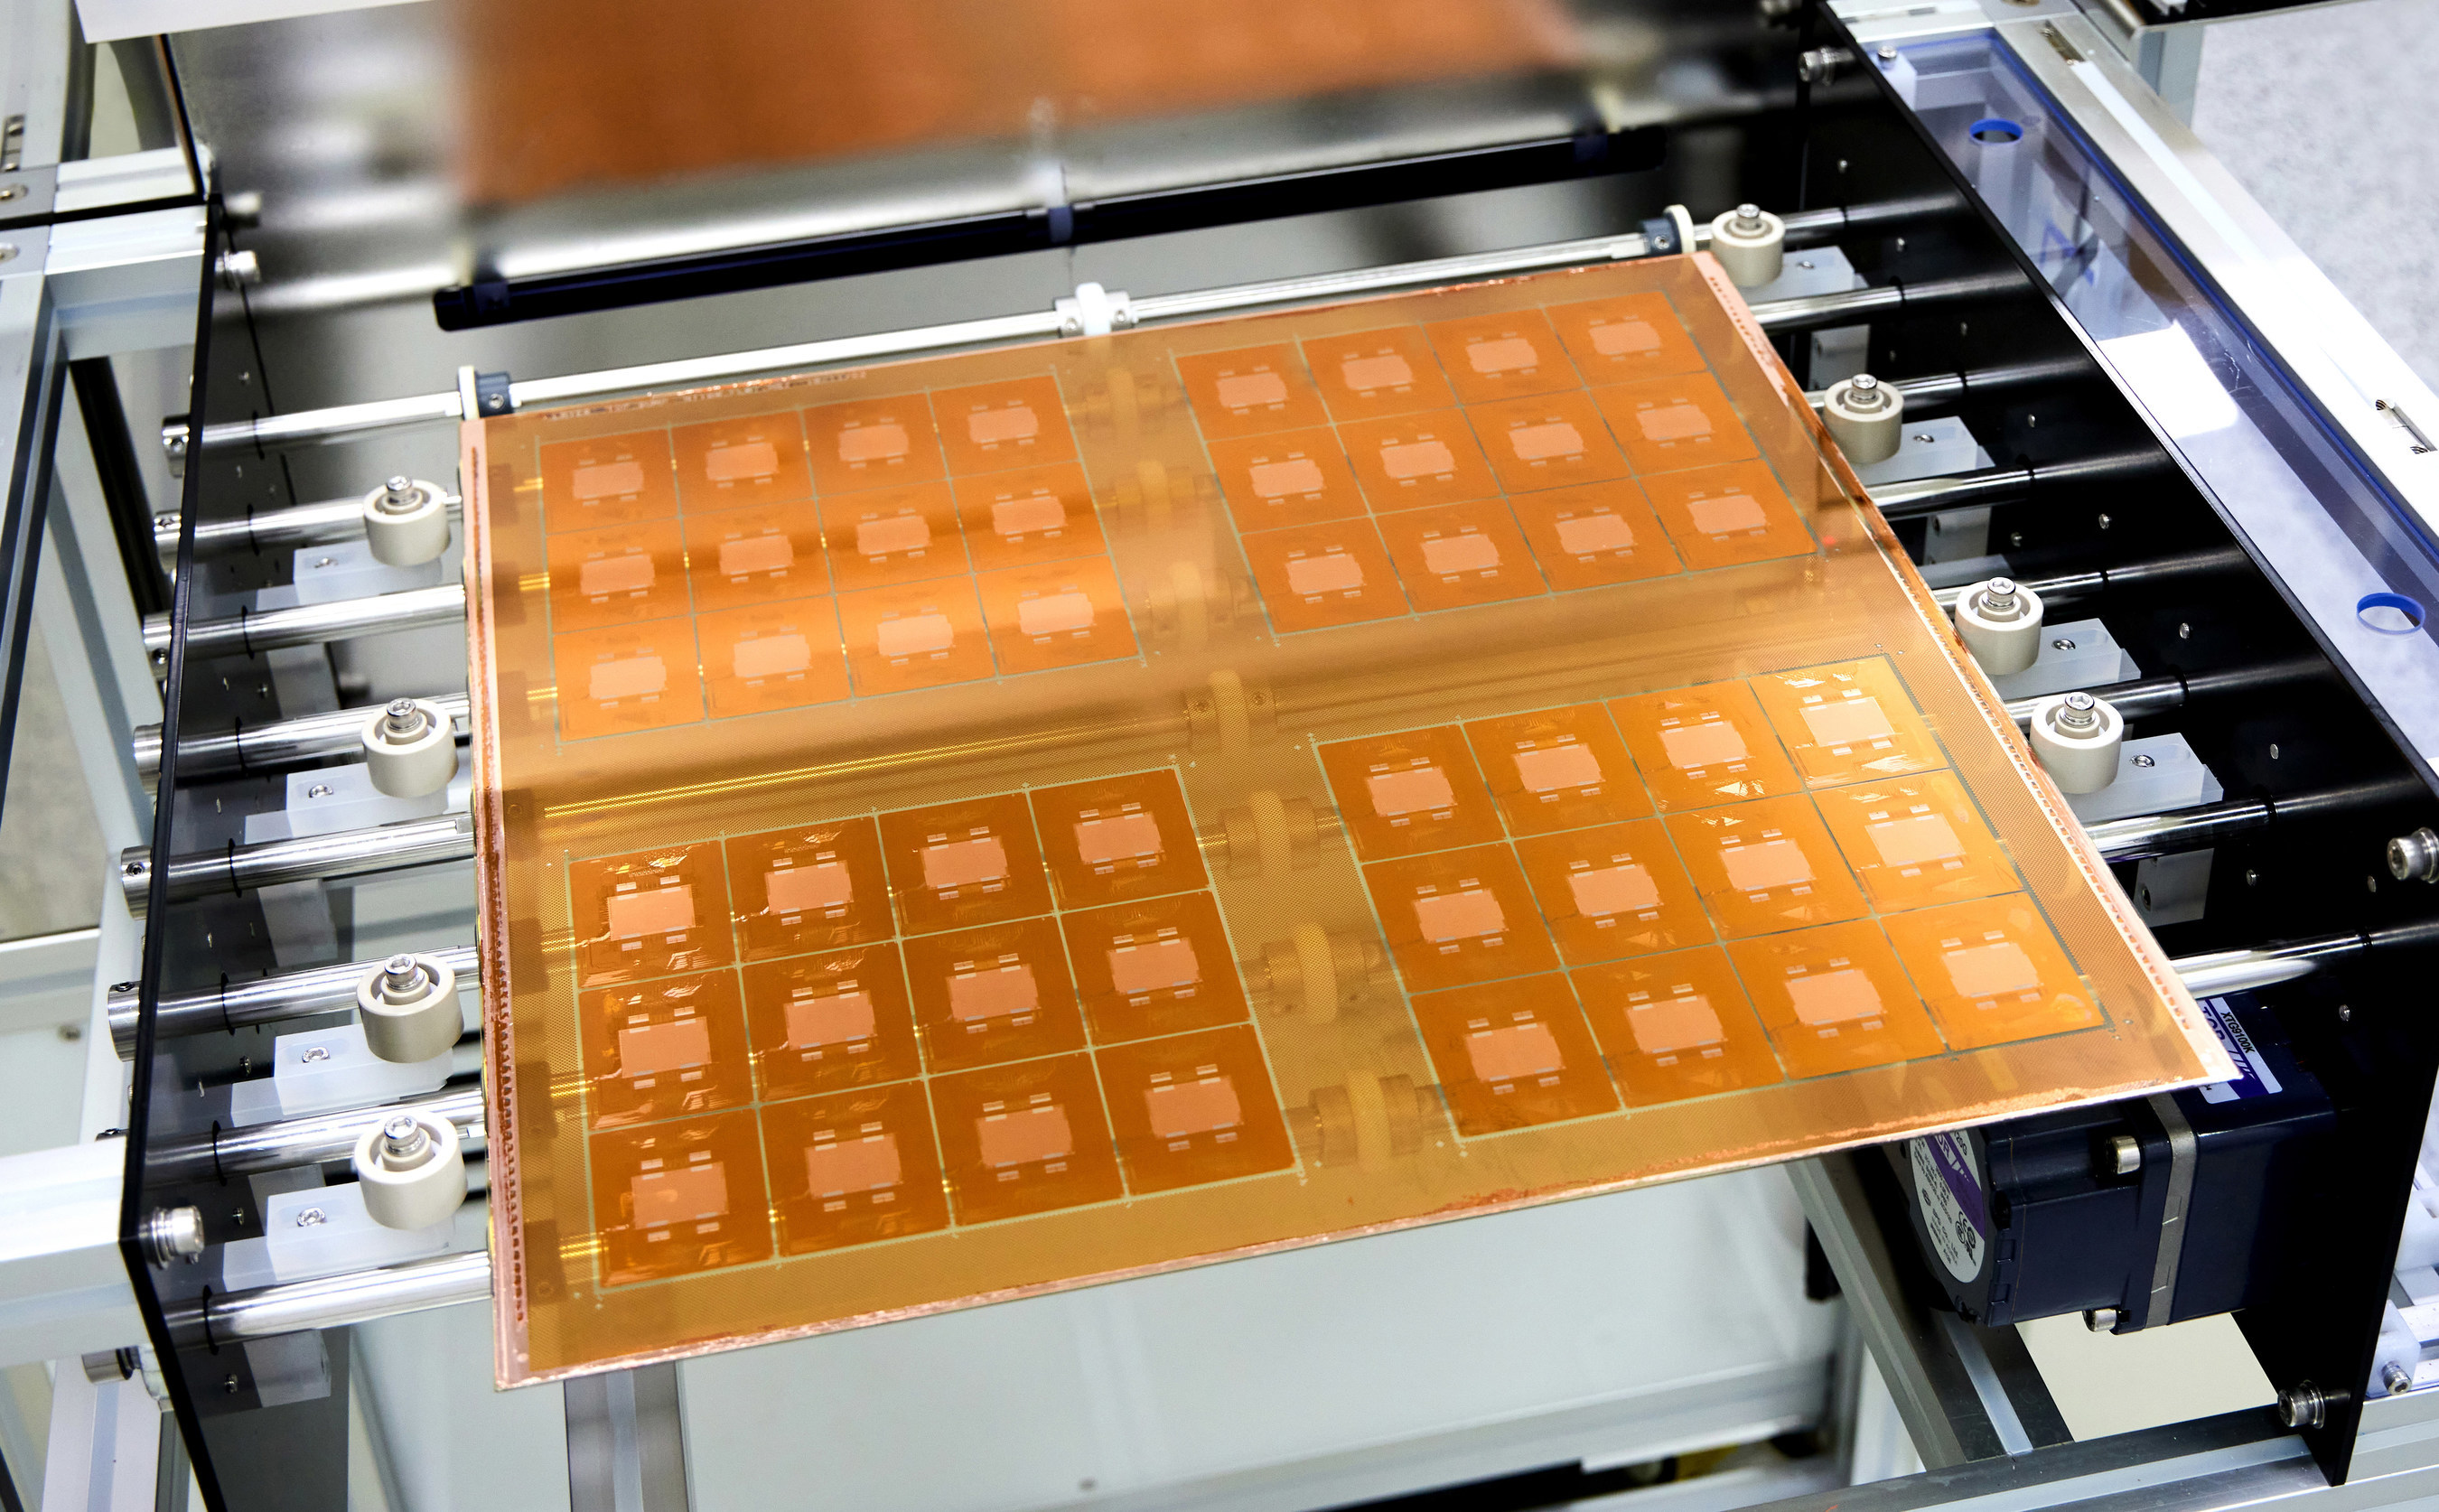 Absolics’ glass substrate nears completion in its manufacturing process. The material will reduce the space required for a multi-chip package, allowing for more chips to be packed into a single device.